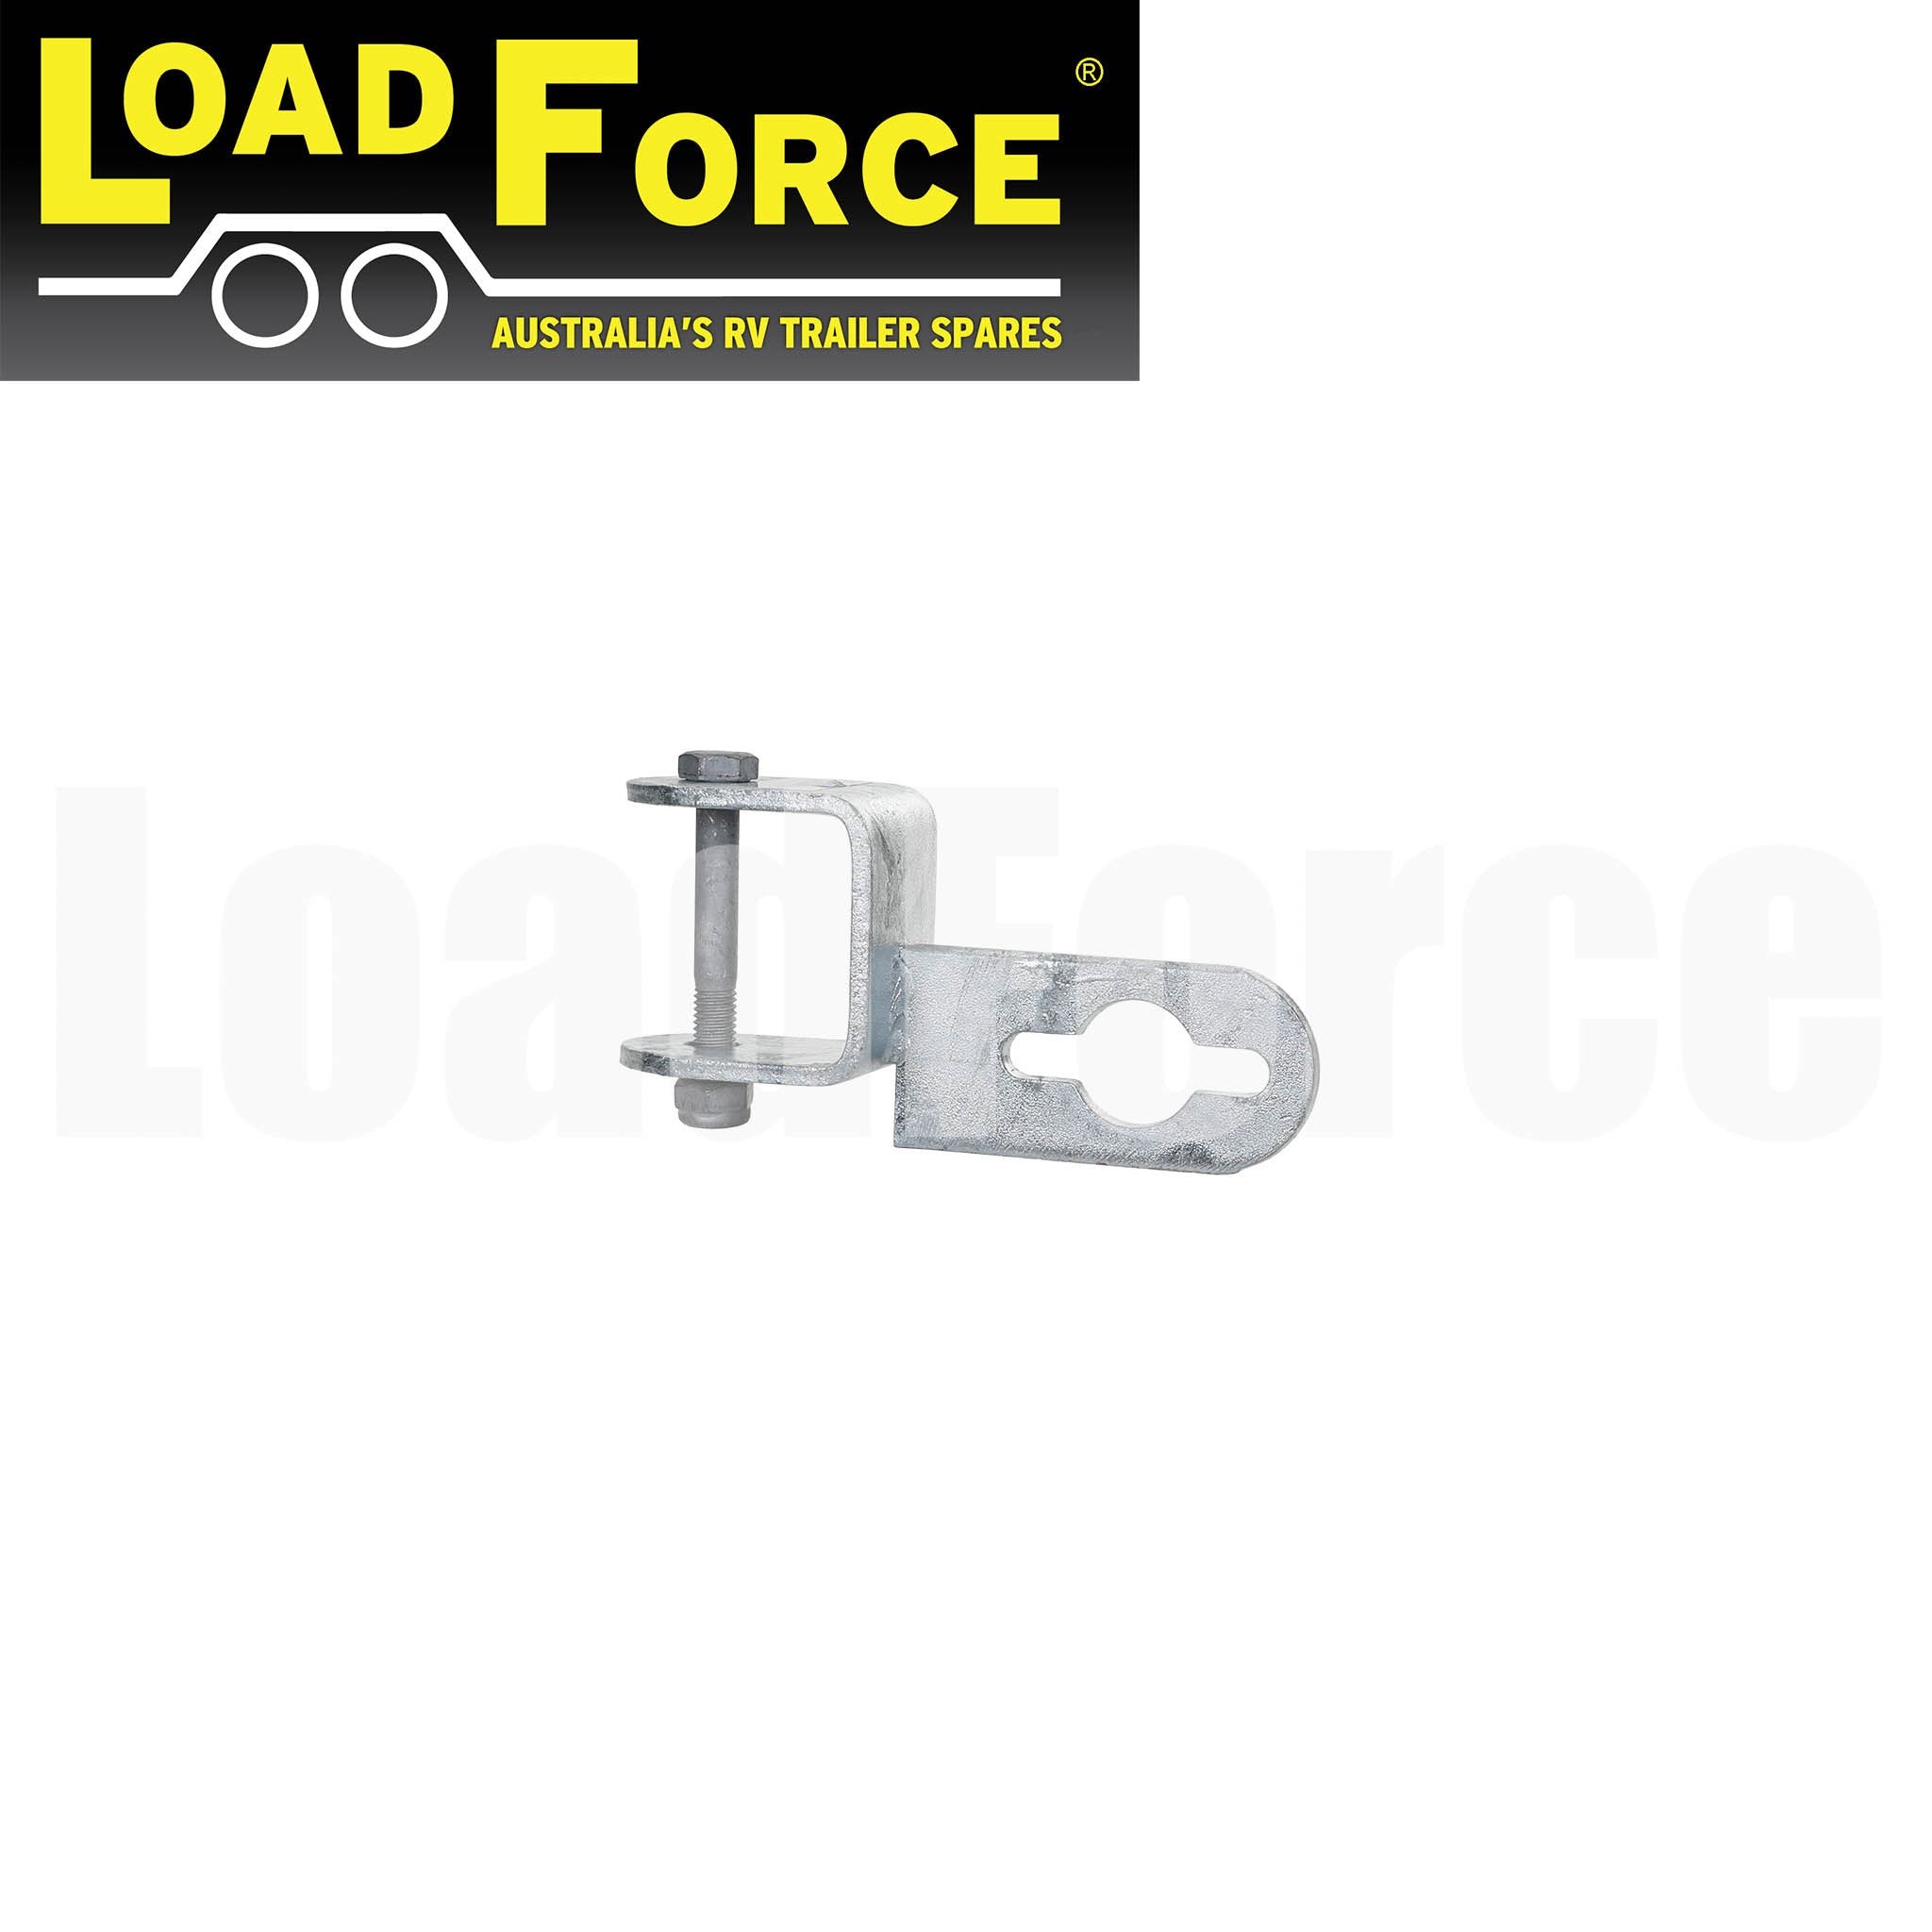 Motor support key way clamp-on 2 x 1 inch